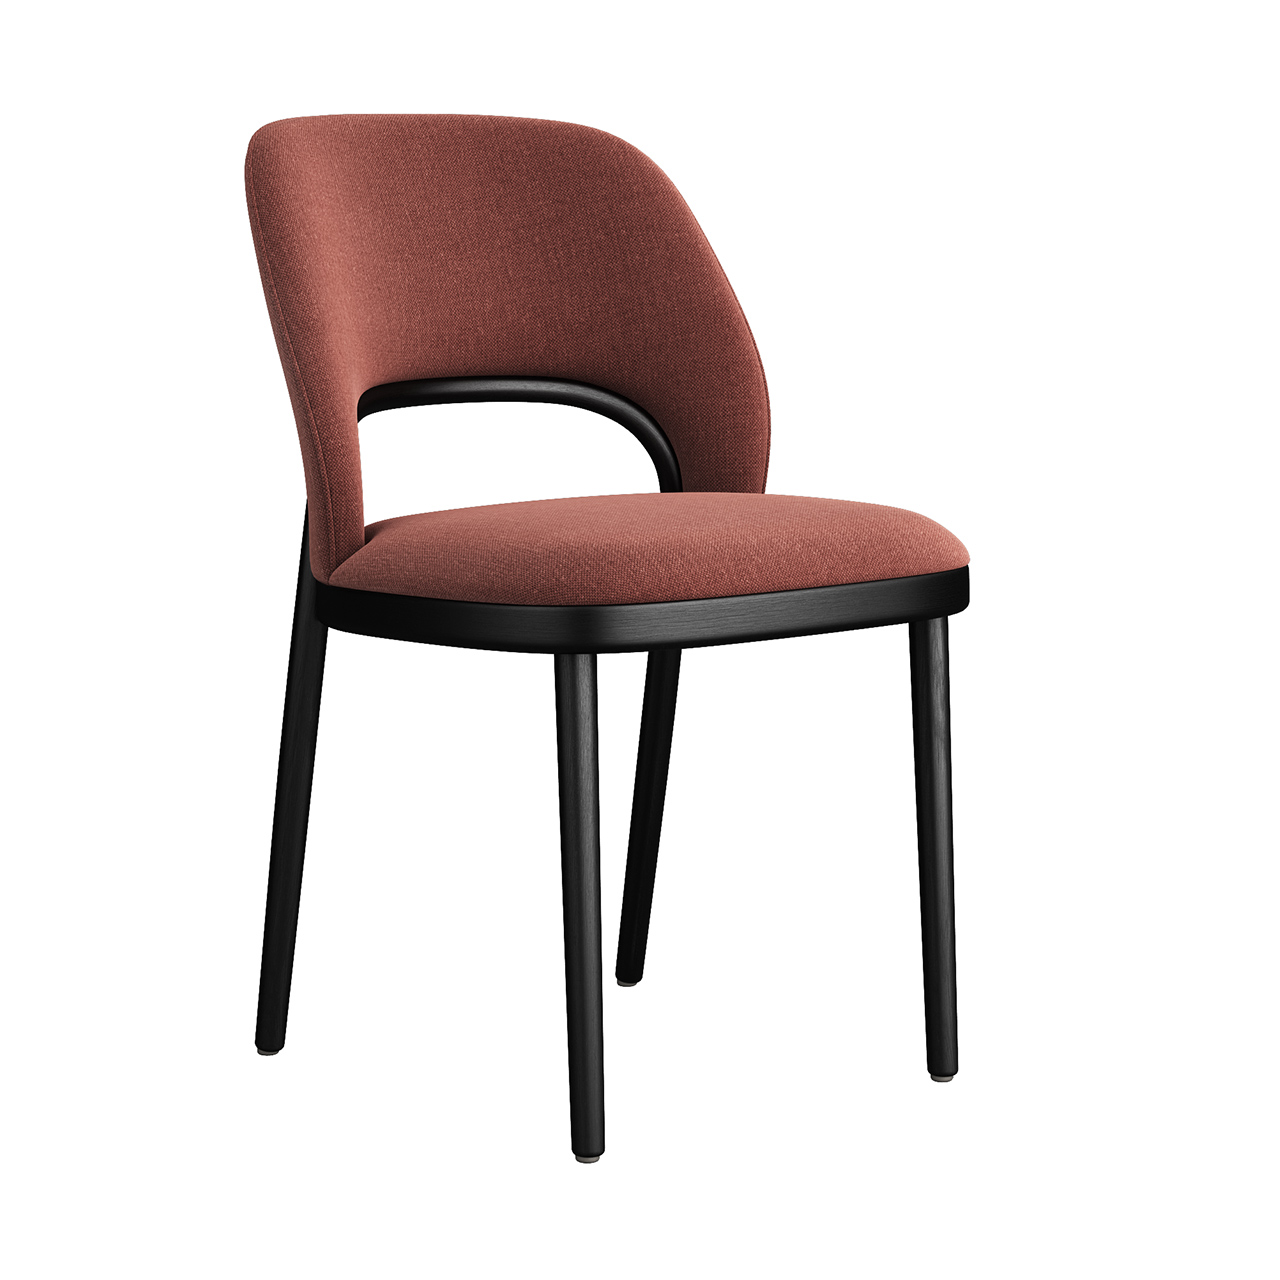 520 P Chair by Thonet